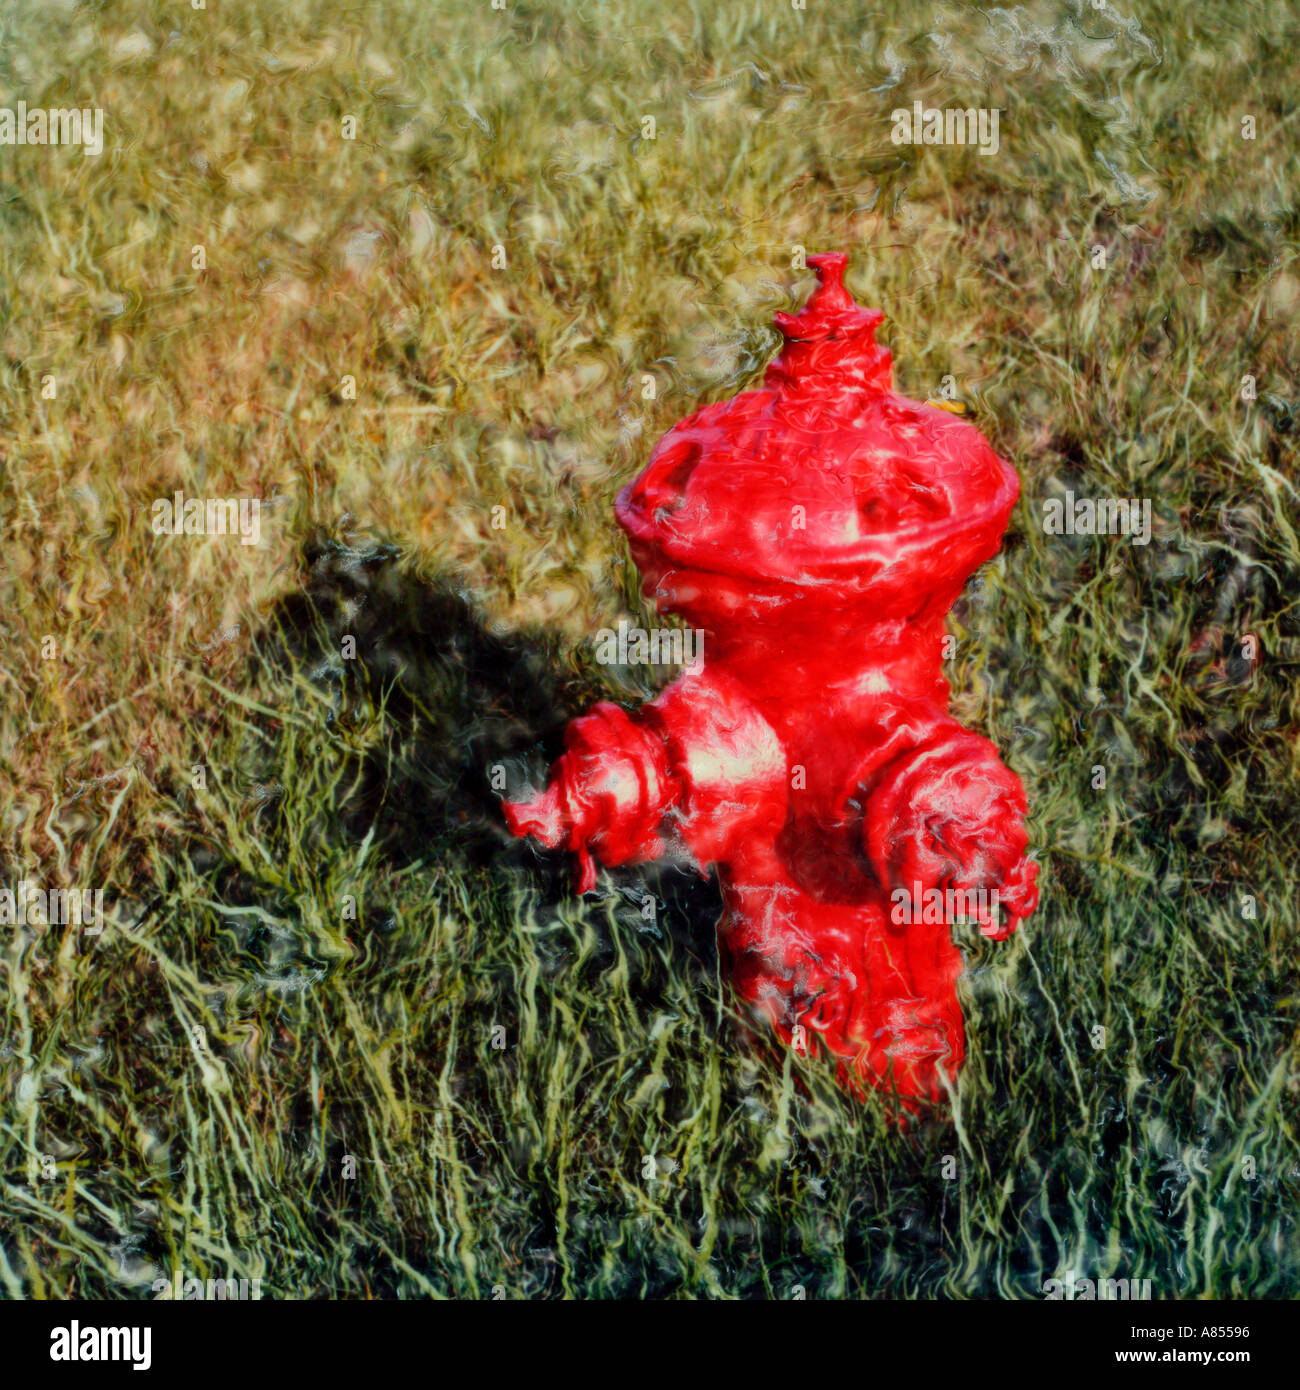 red fire hydrant in grass Stock Photo